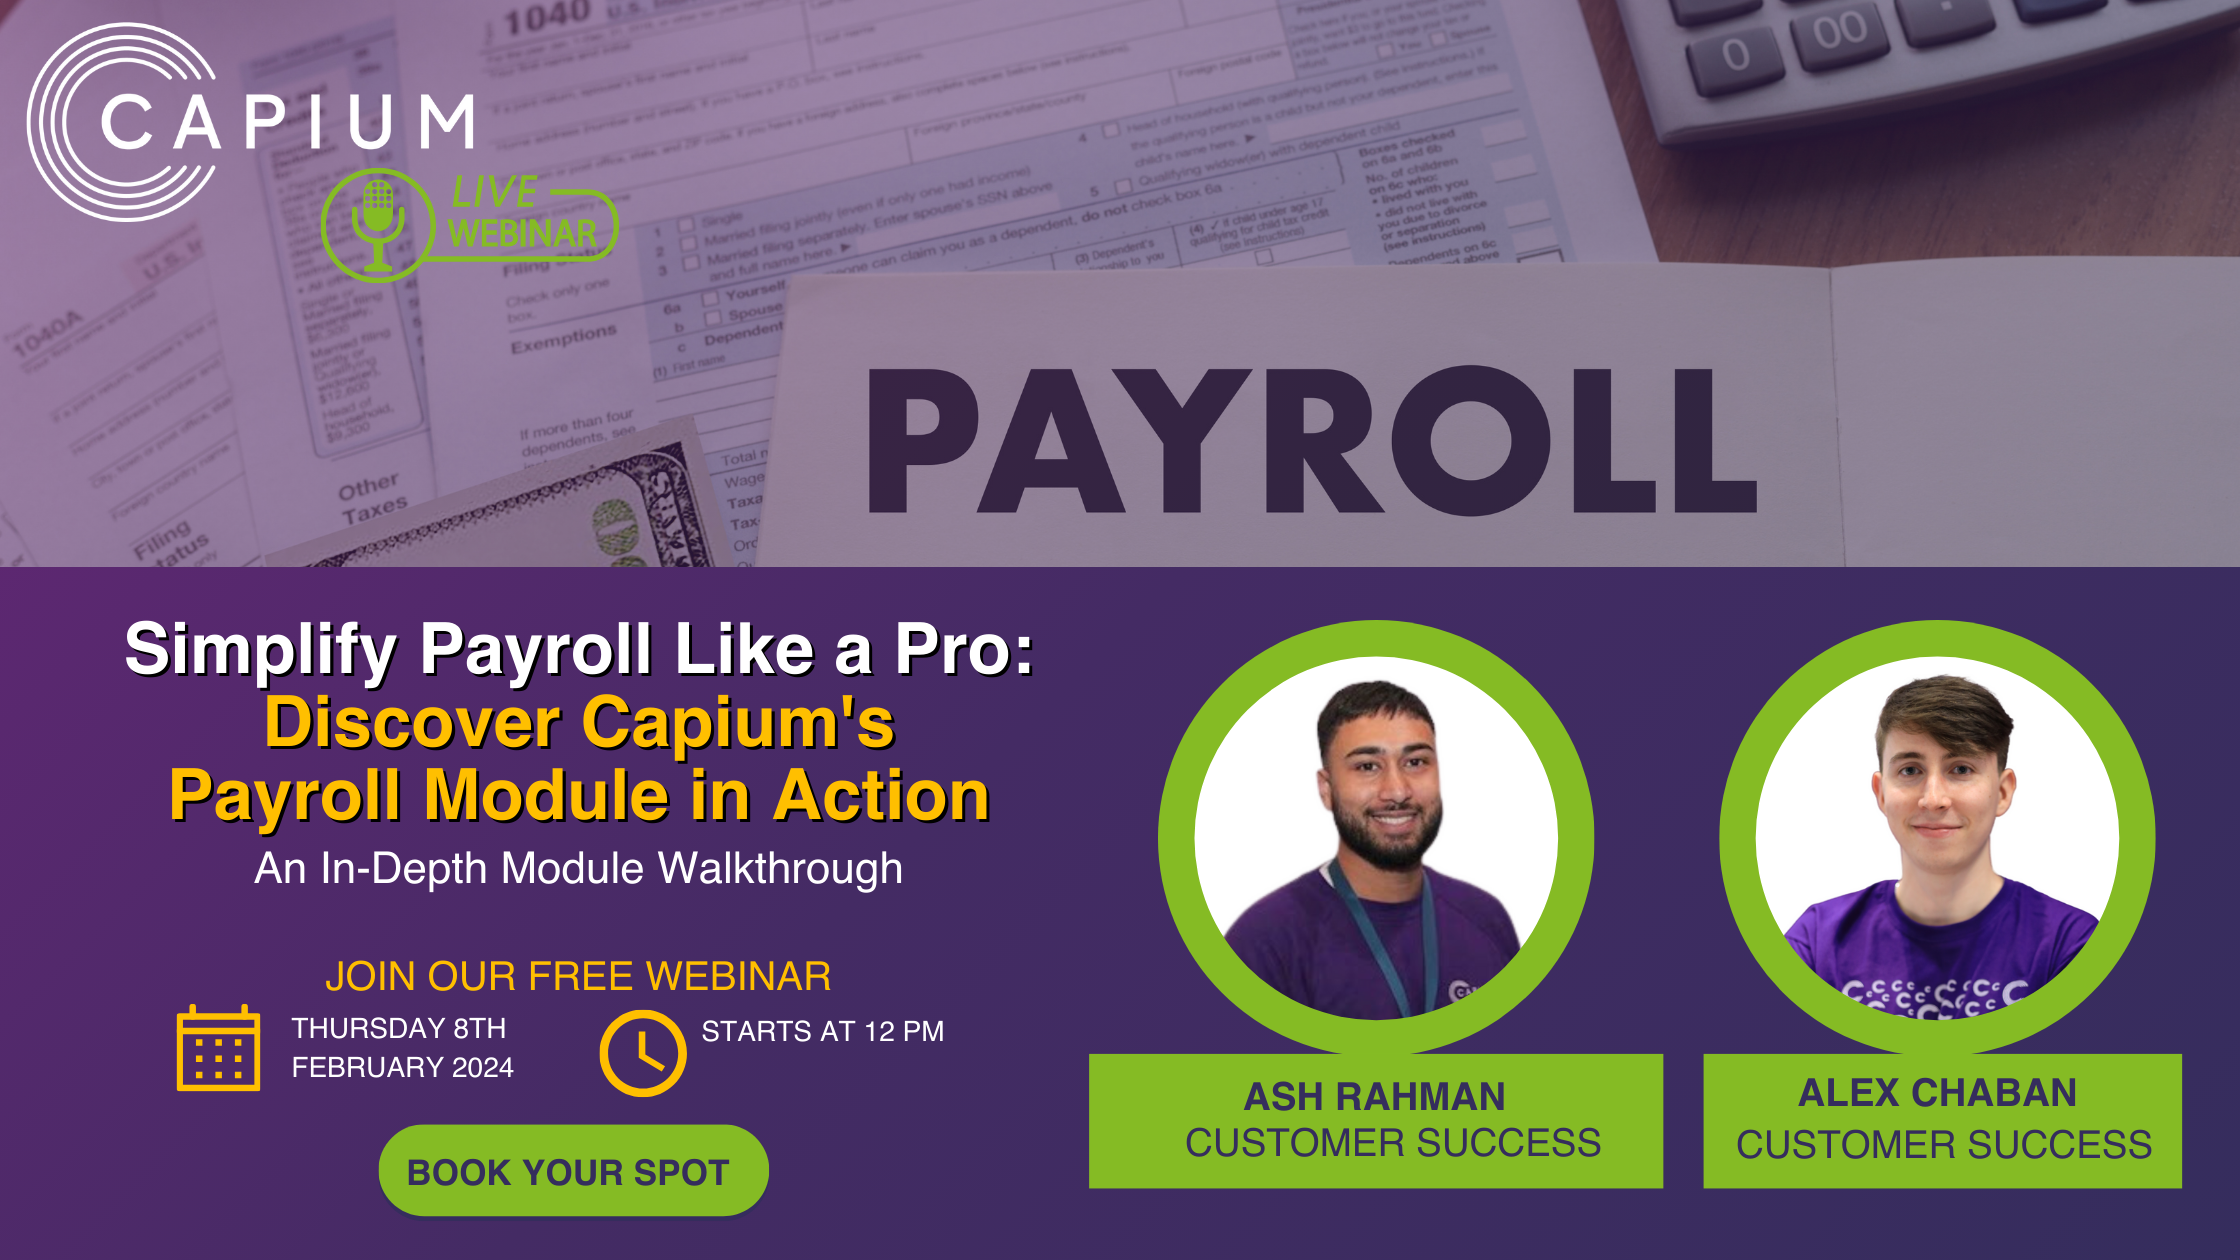 Simplify Payroll Like a Pro: Discover Capium's Payroll Module in Action image